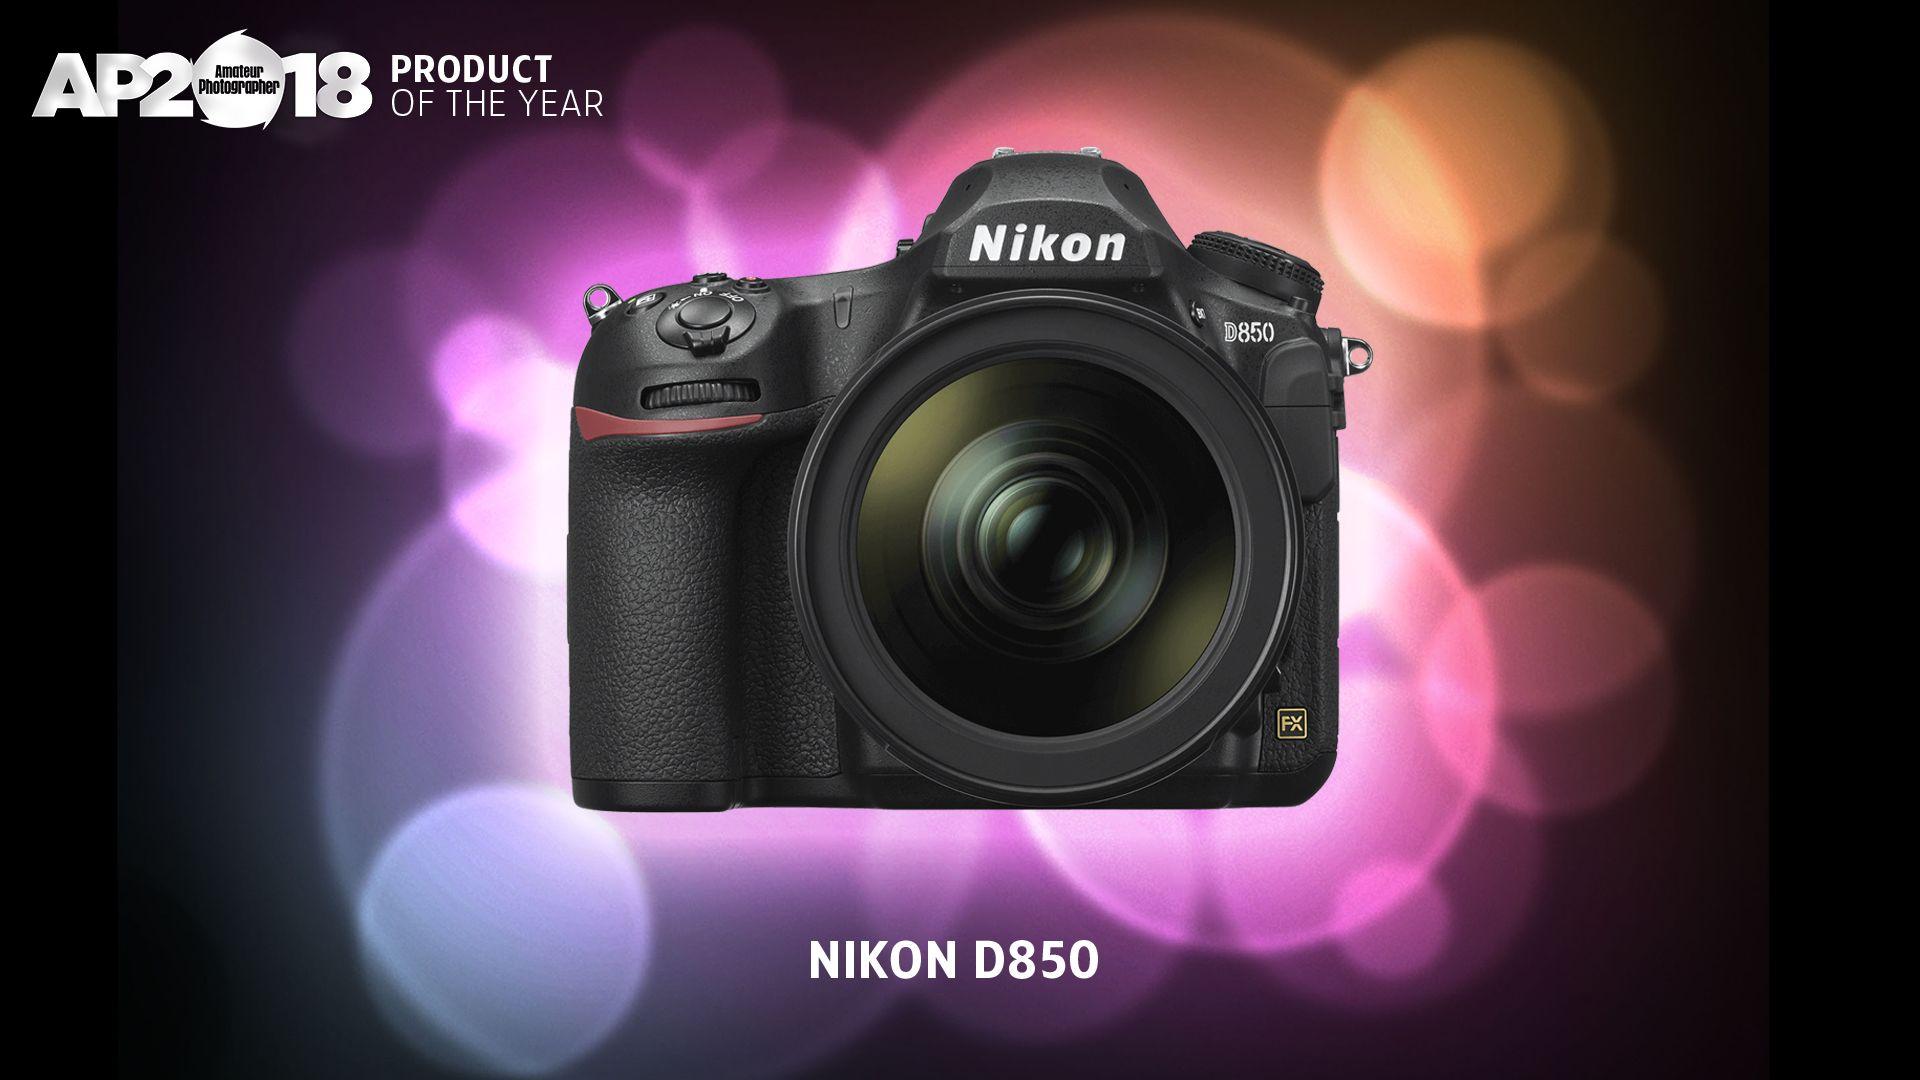 Nikon D850 scoops Product of the Year at the Amateur Photographer